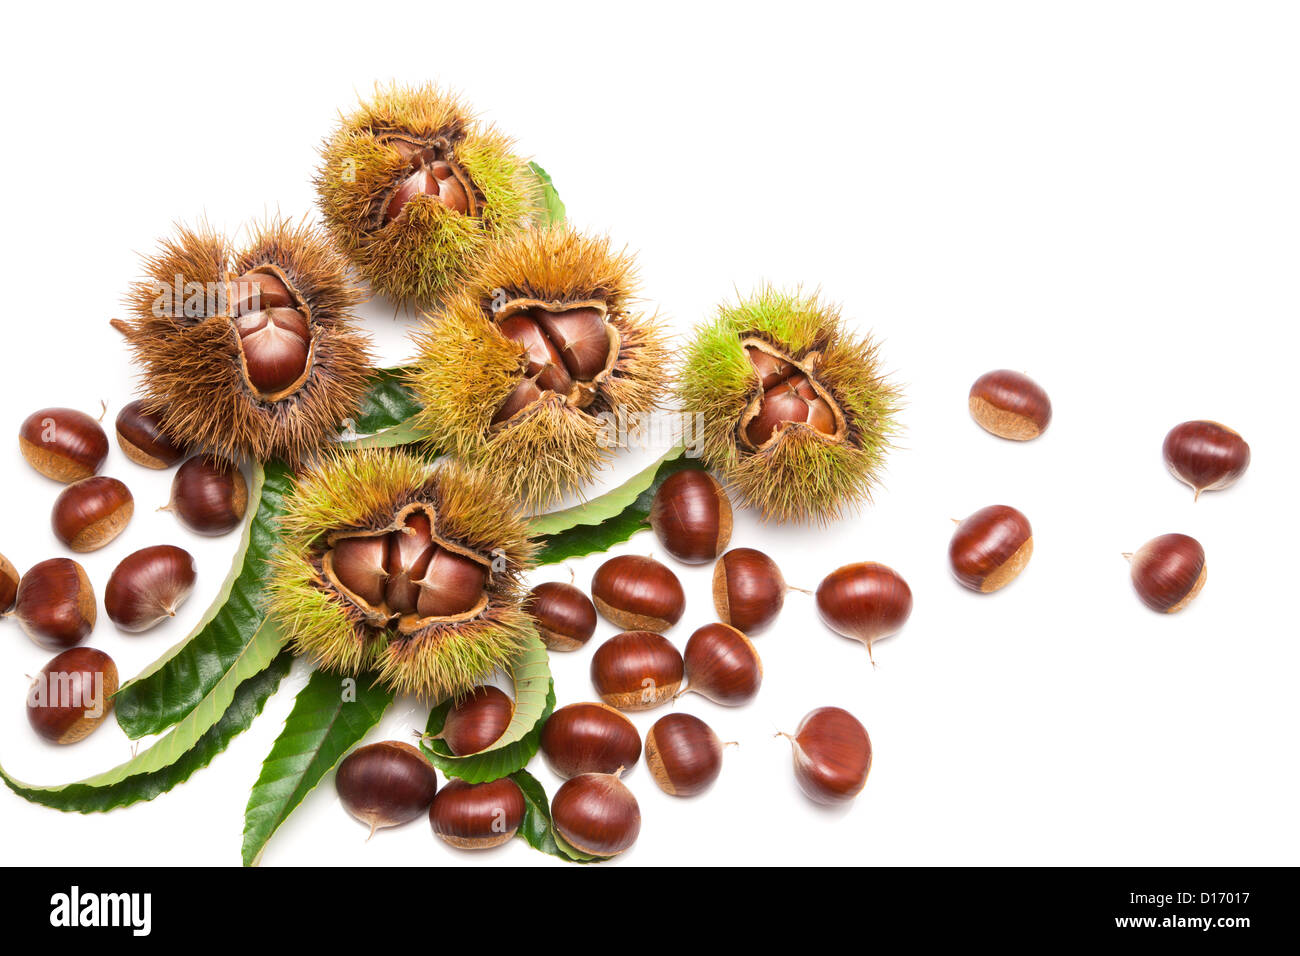 Chestnuts and leaves against white background Stock Photo